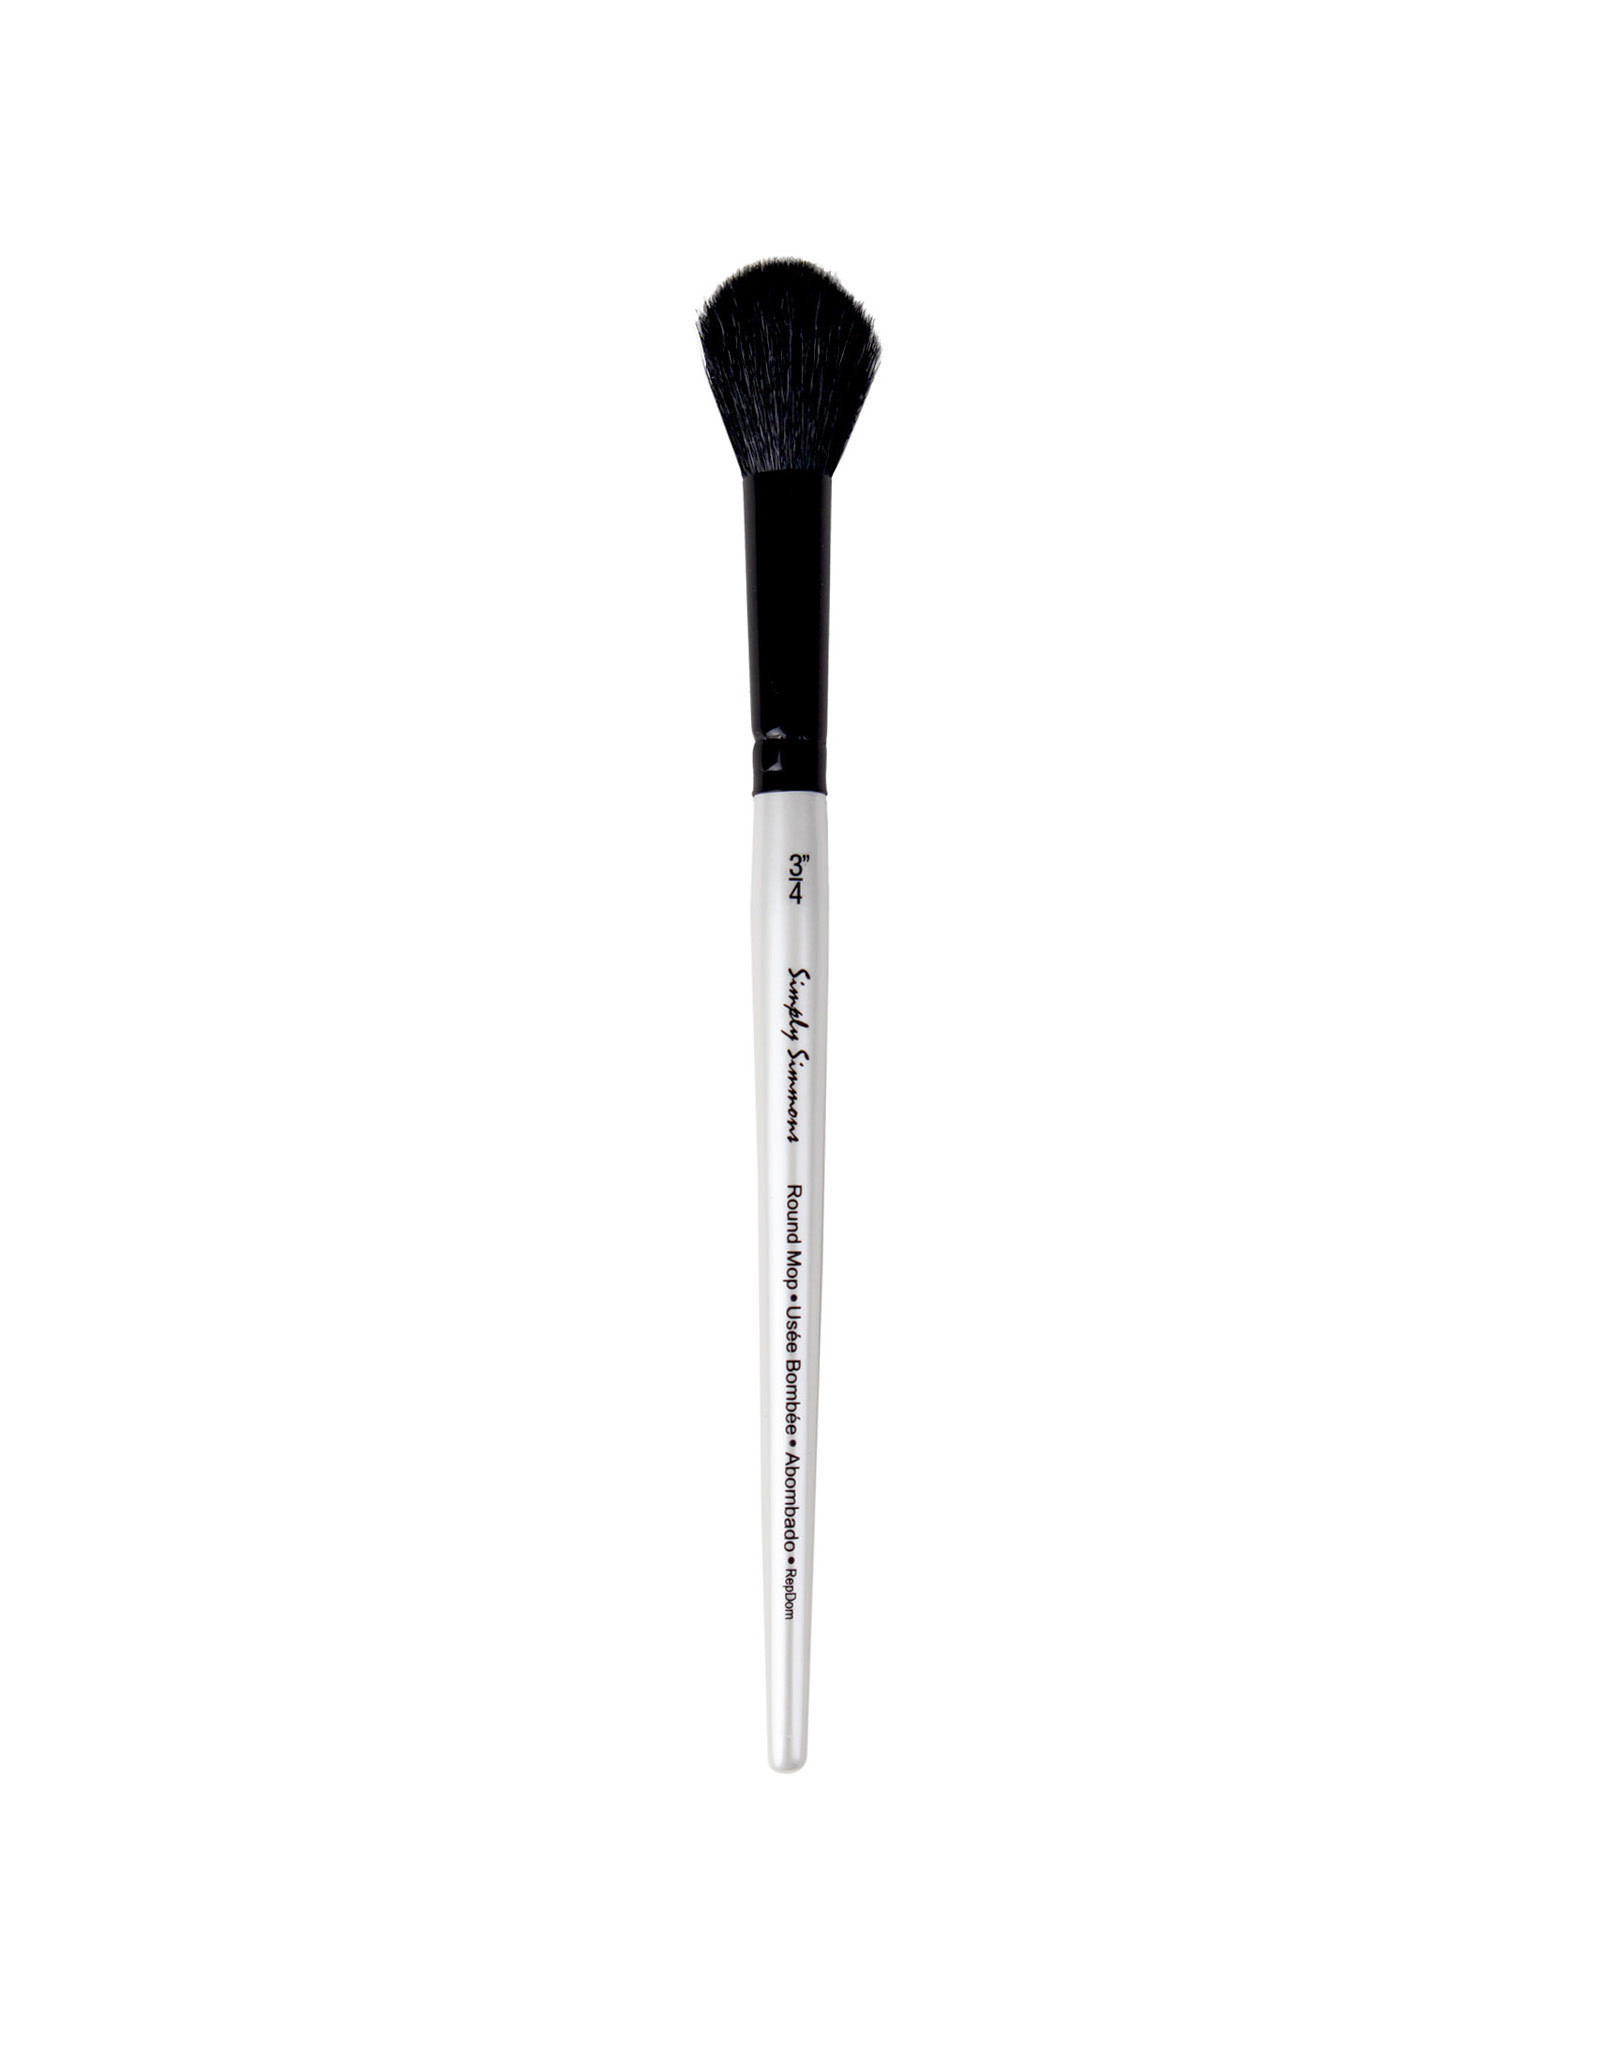 Daler-Rowney Simply Simmons Black Goat Round Mop ¾"